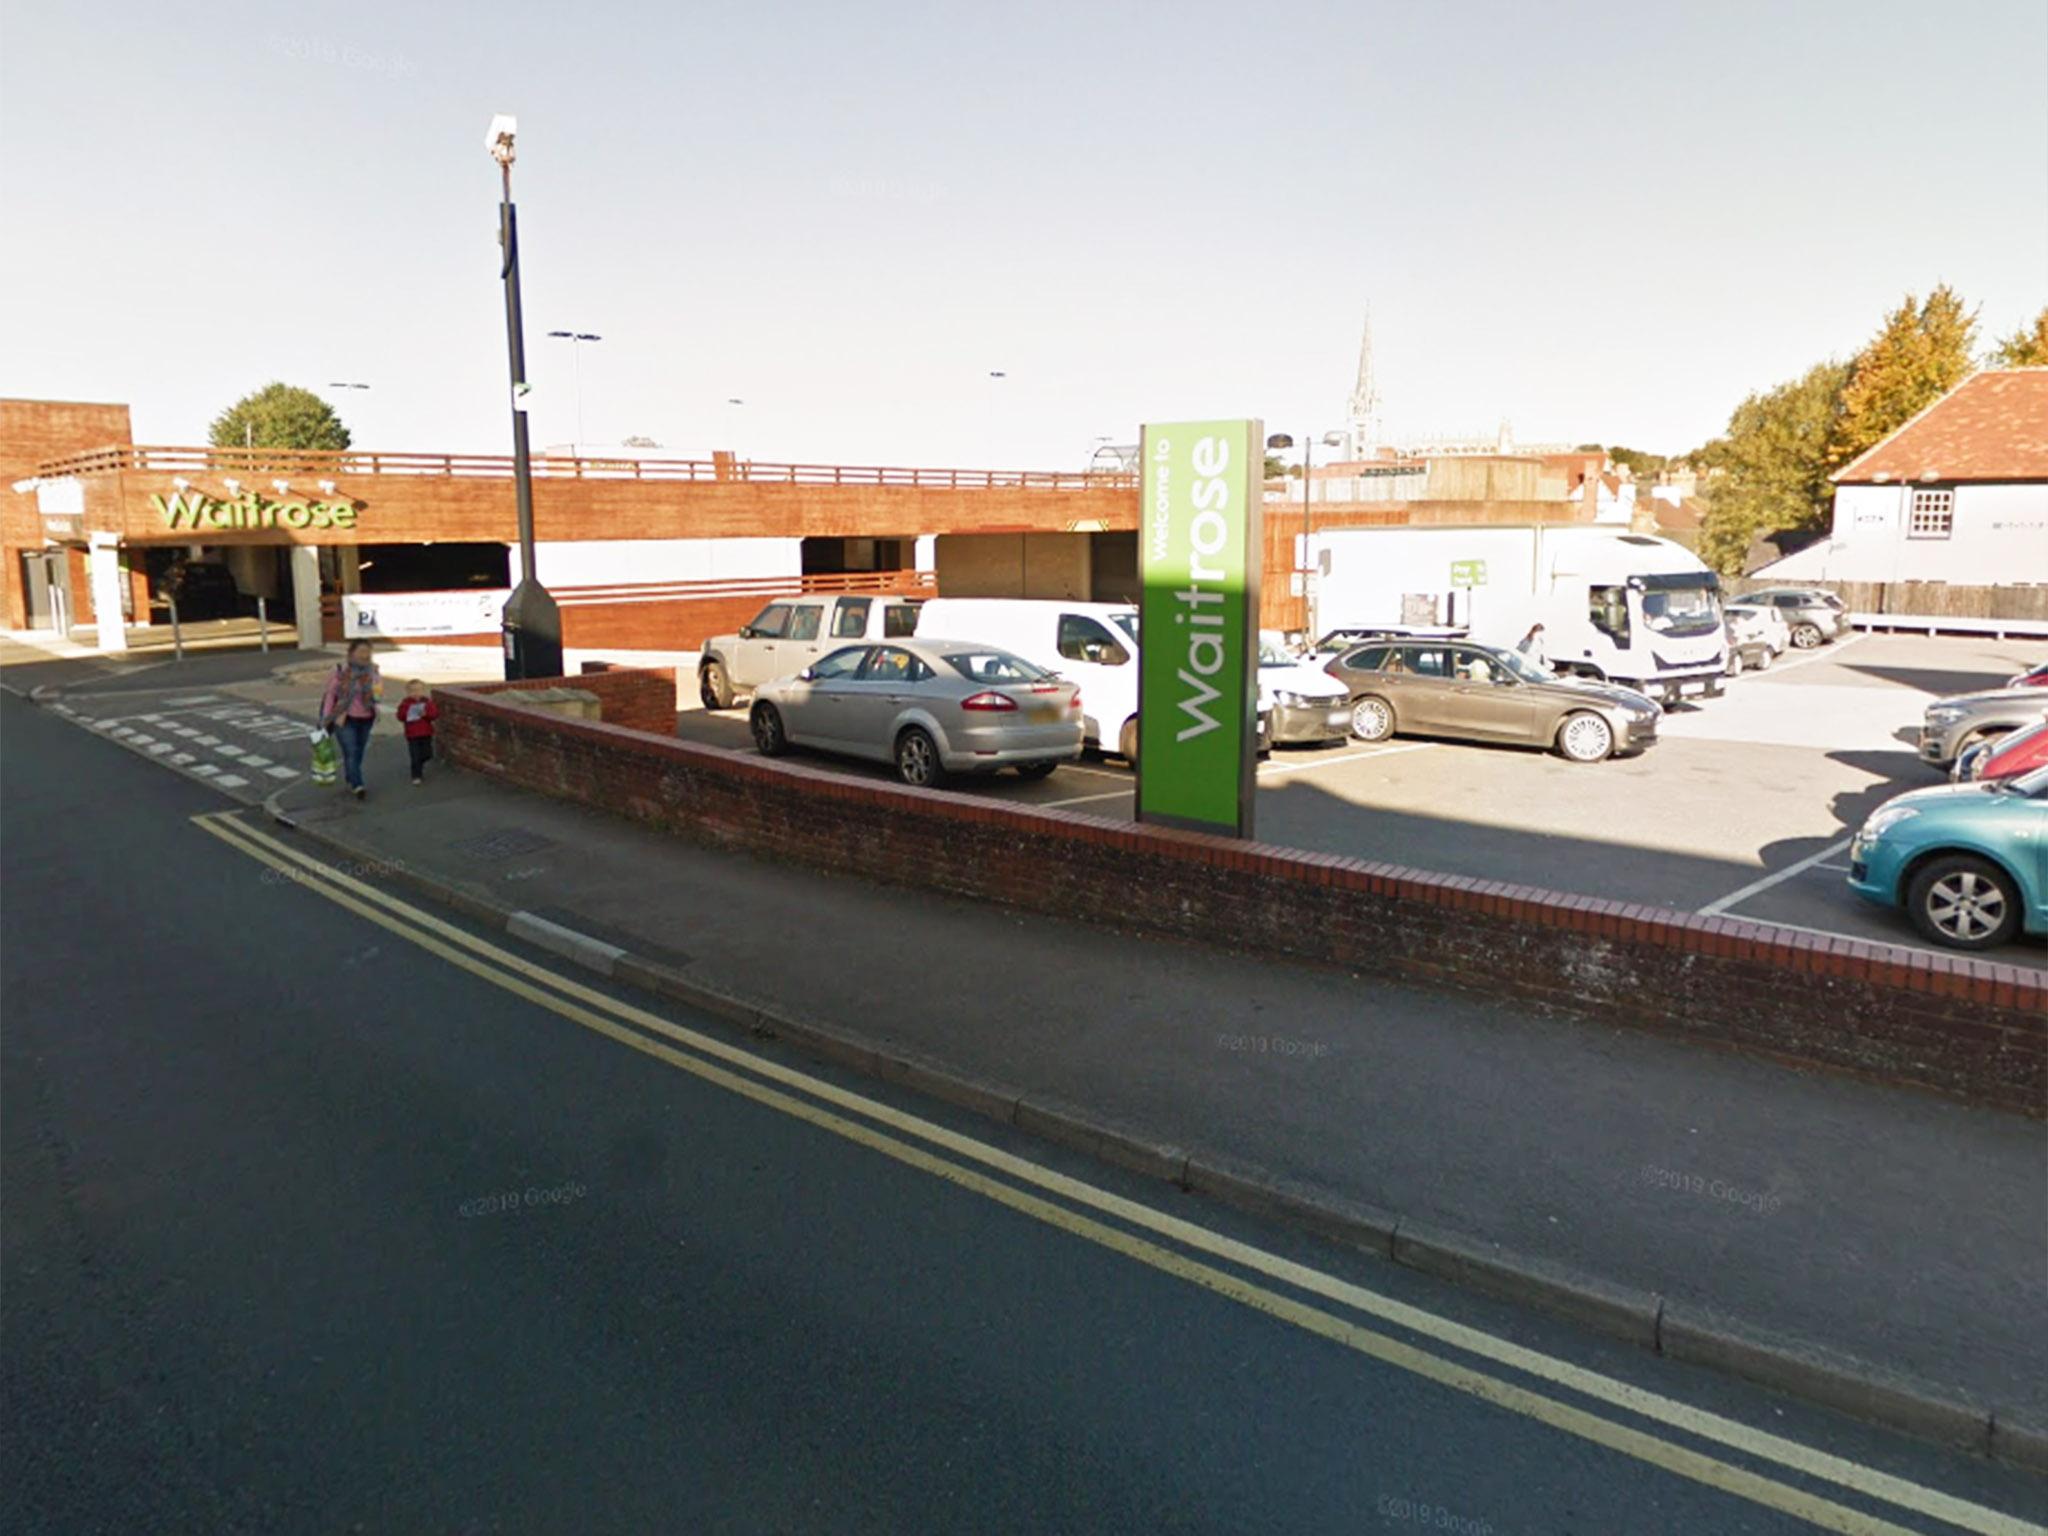 The suspect approached the man while he was parking at Waitrose